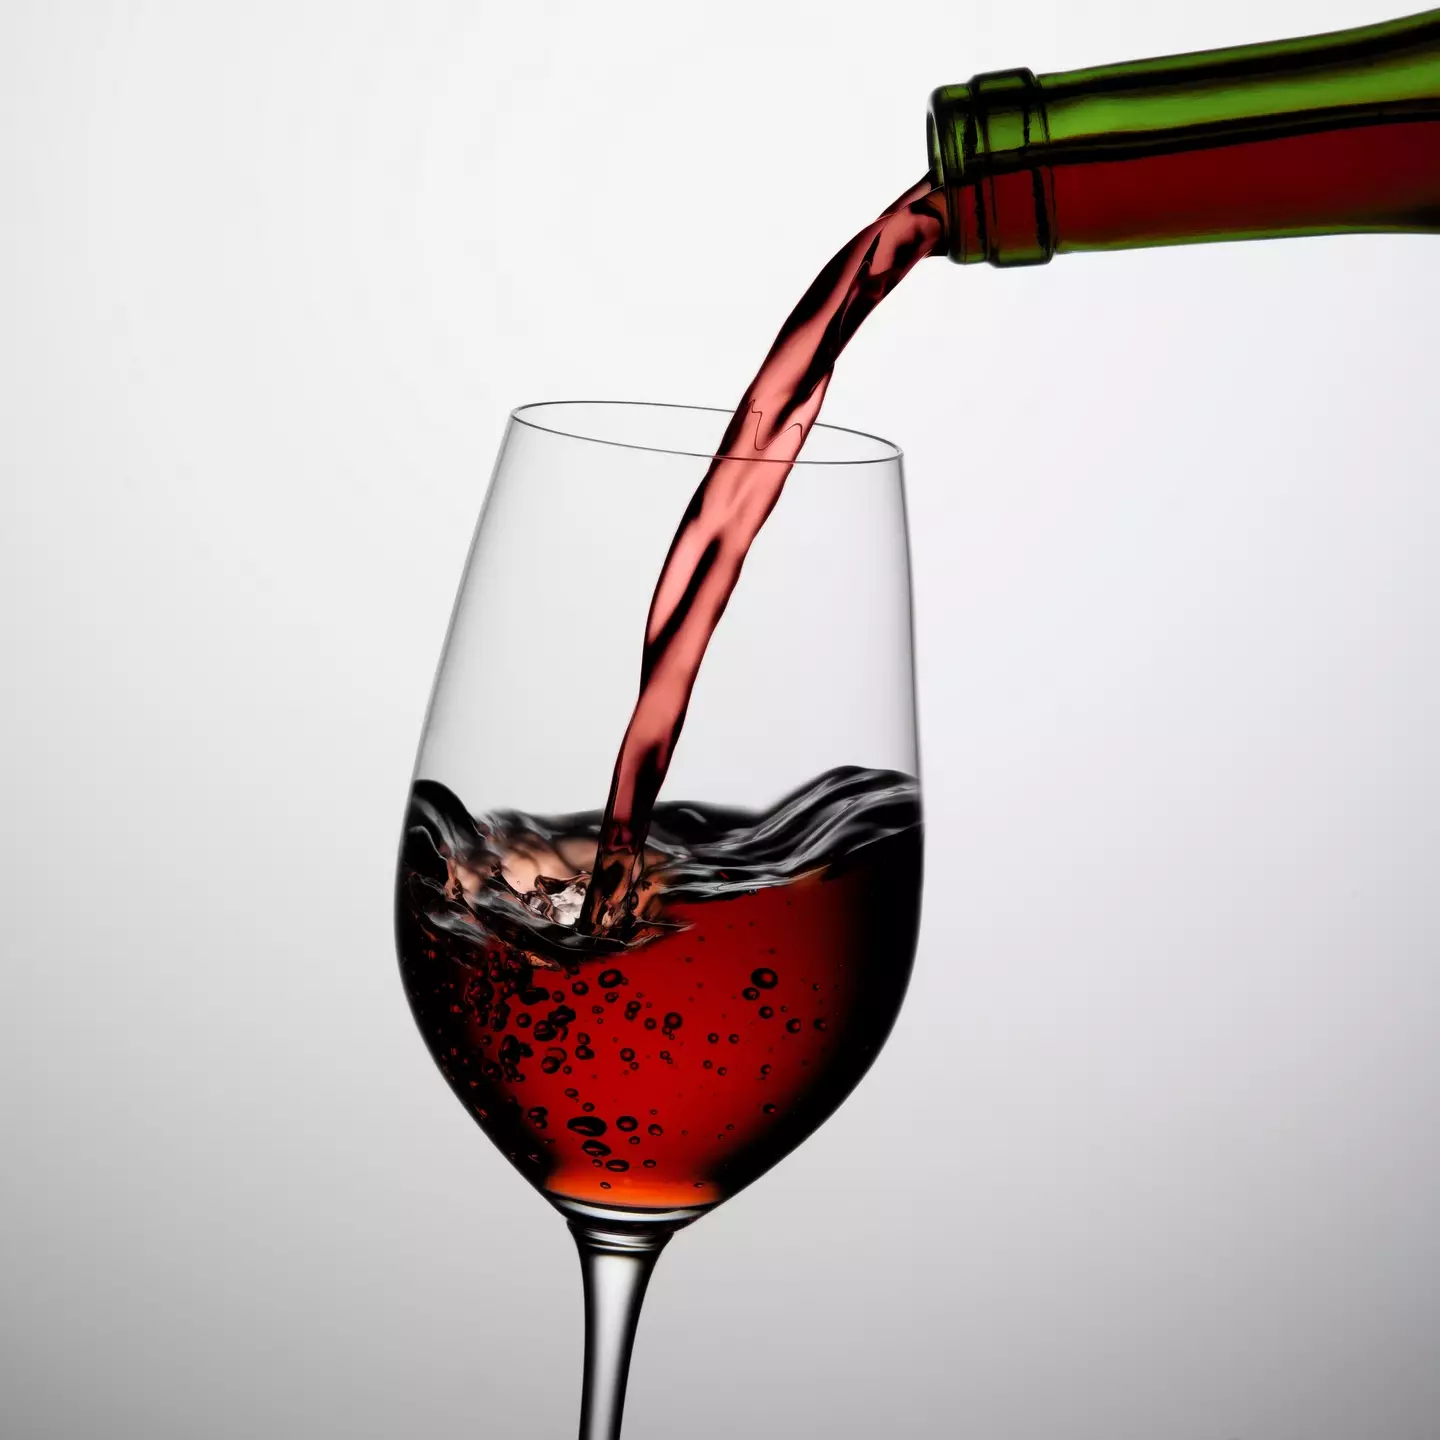 Brits will soon be able to purchase a pint of wine.